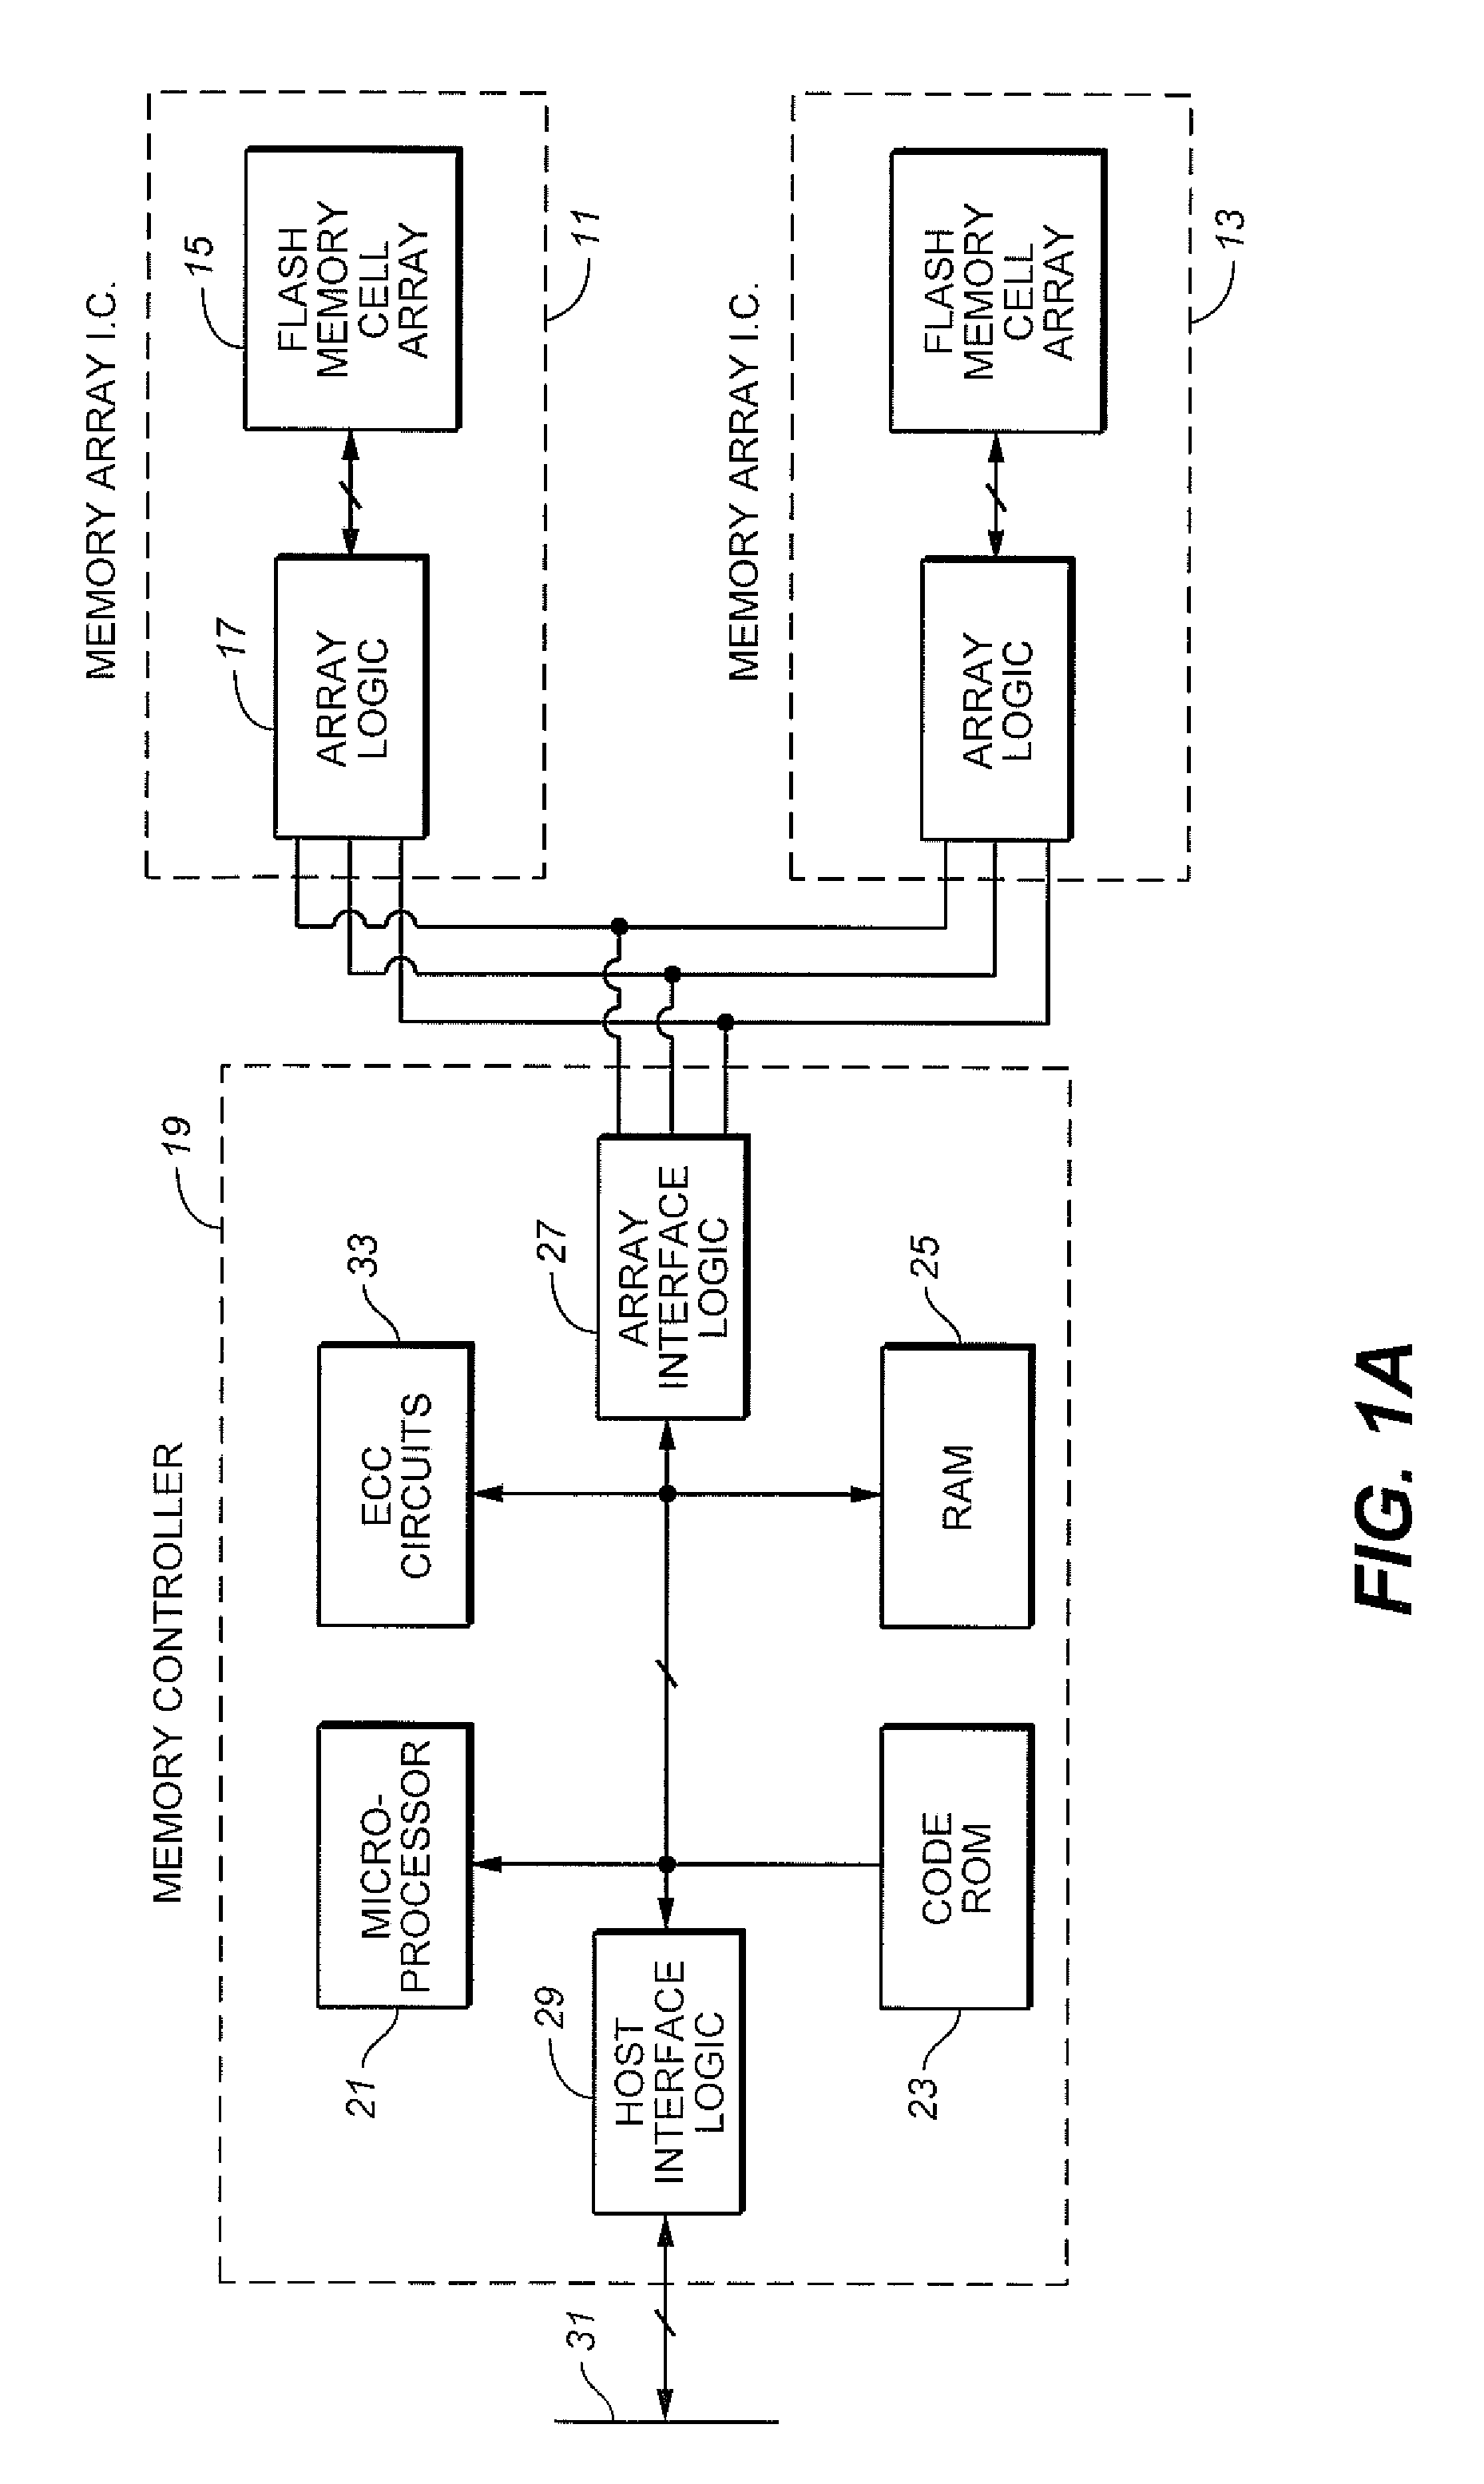 Wear Leveling for Non-Volatile Memories: Maintenance of Experience Count and Passive Techniques